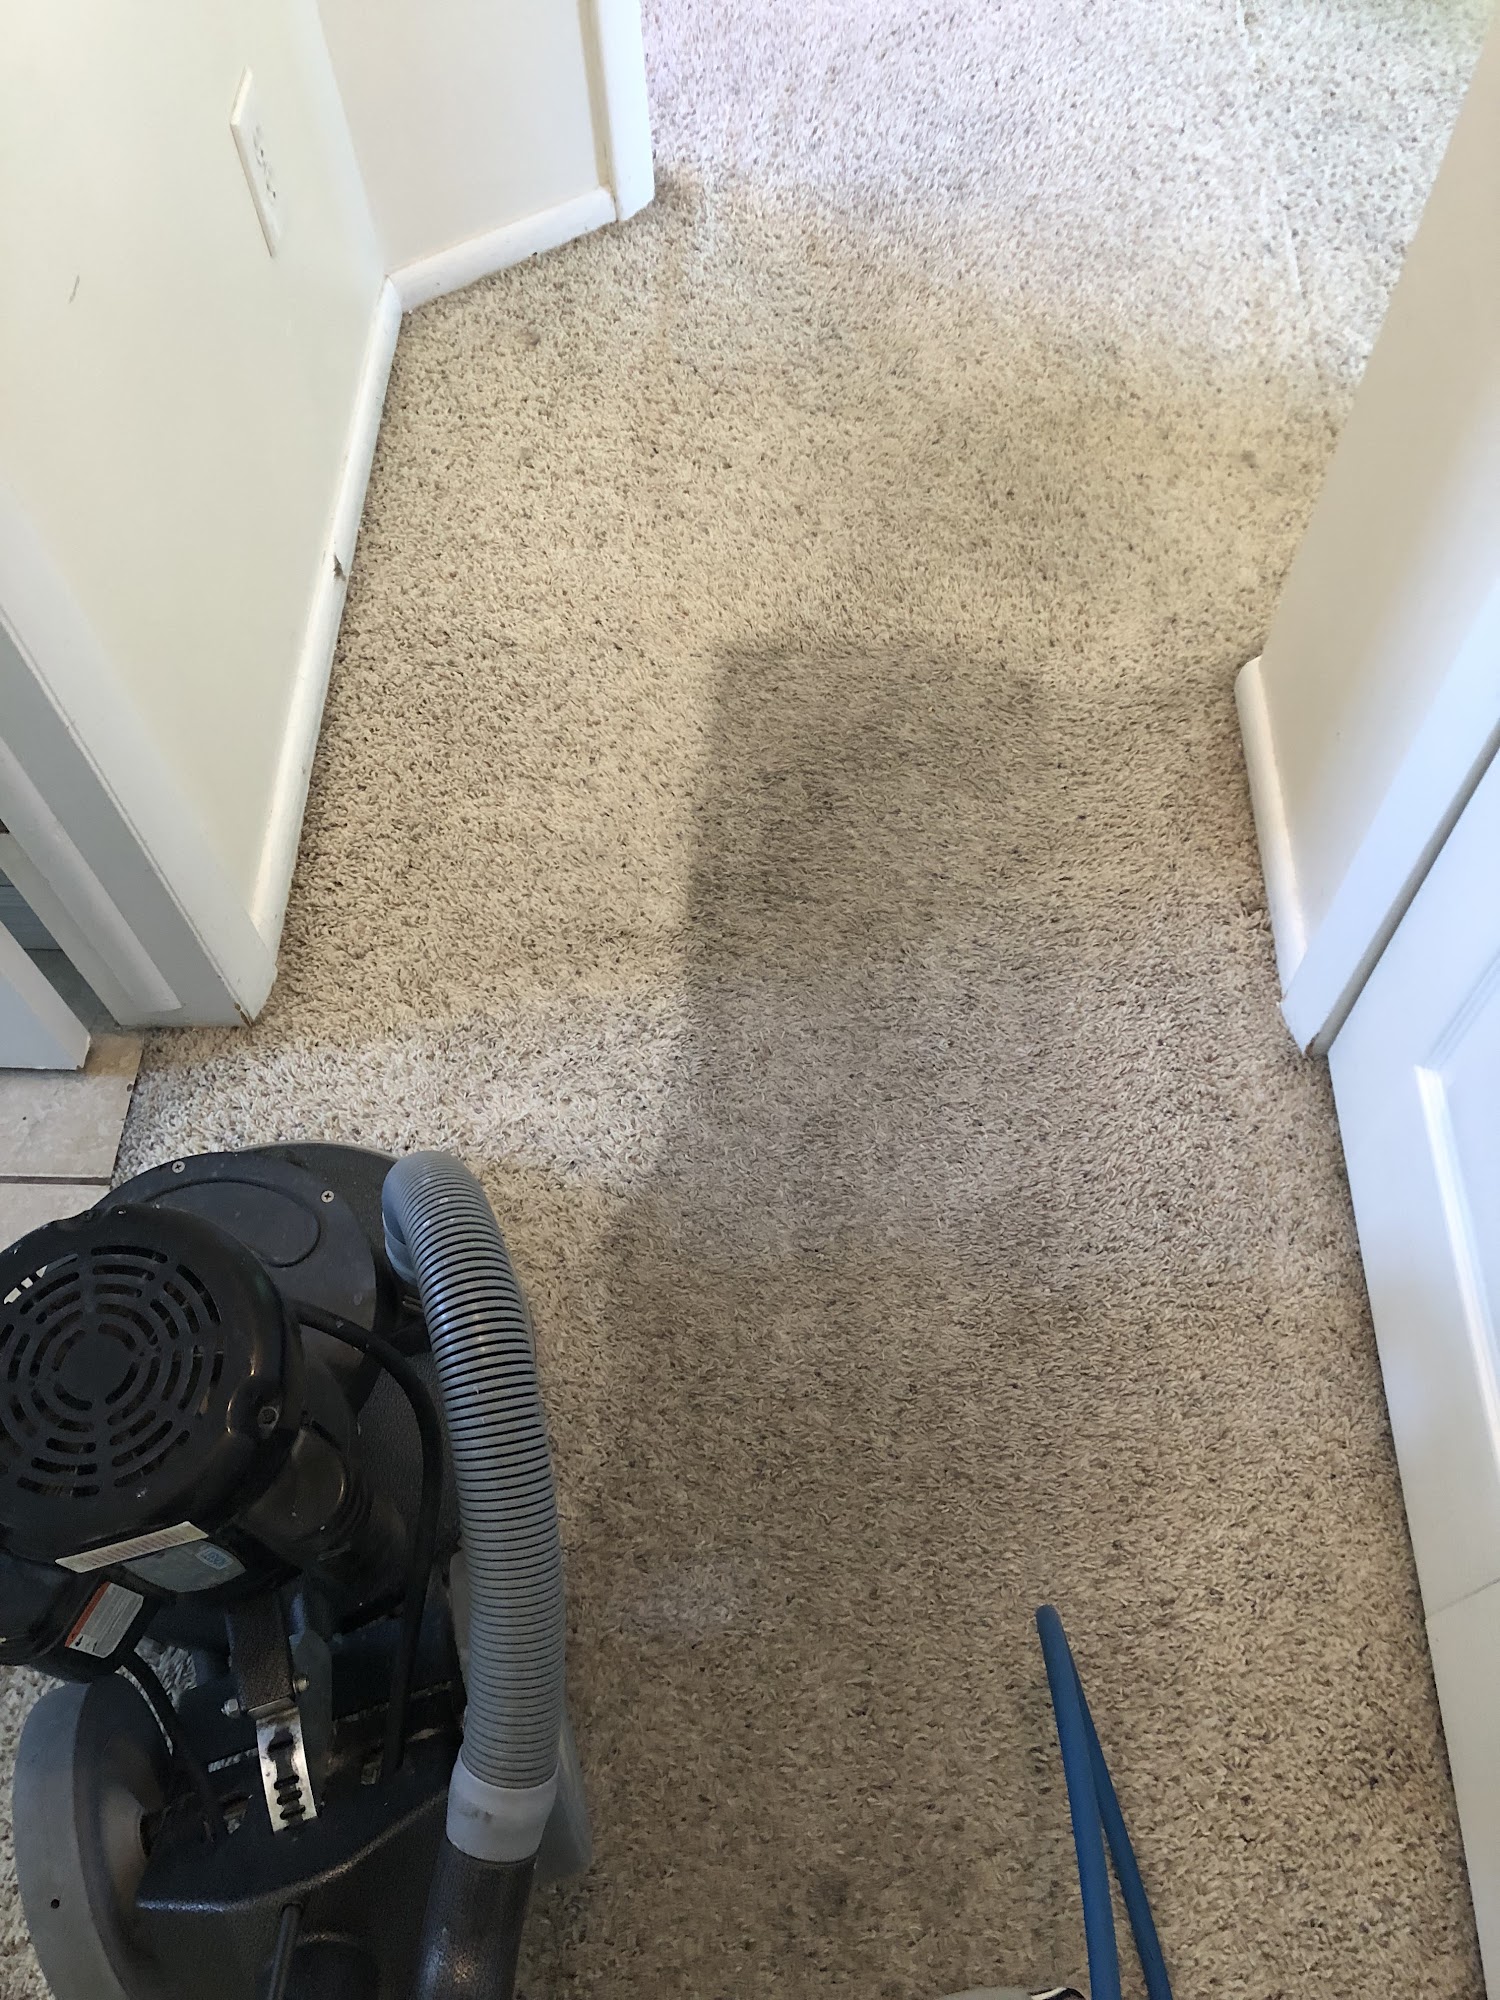 Riley's Carpet Cleaning